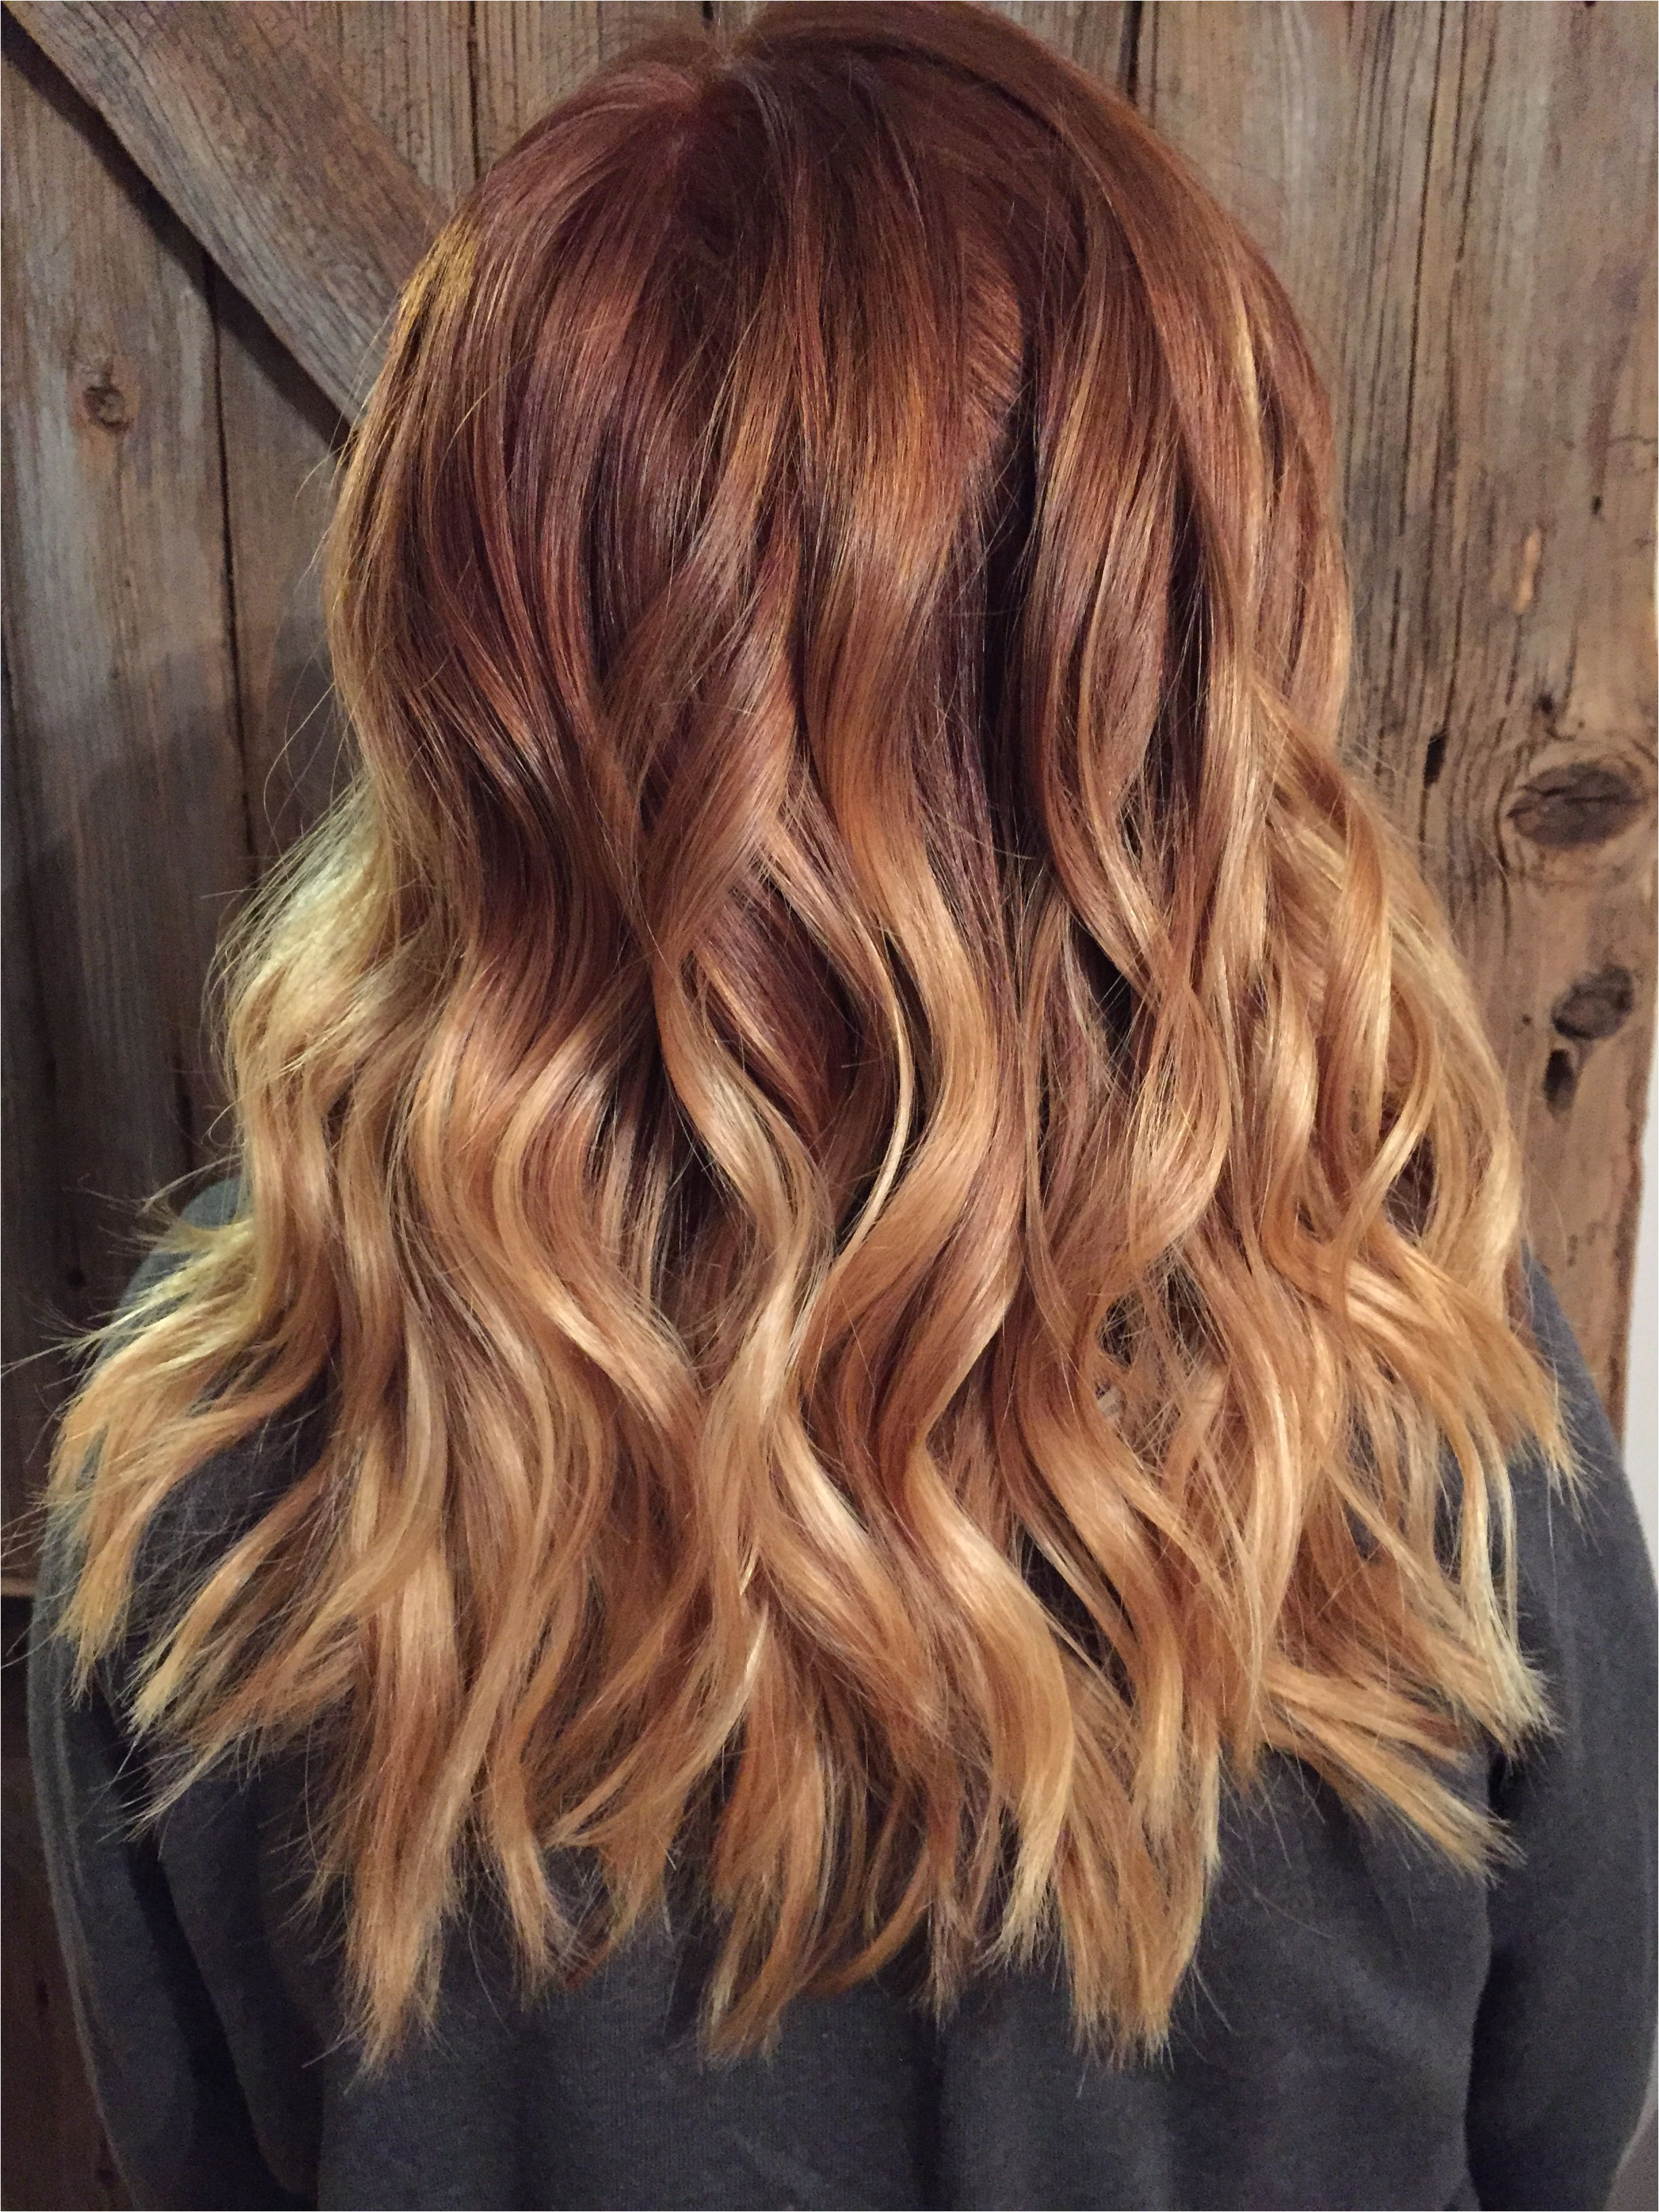 Hairstyles Copper Blonde Copper Red to Blonde Ombré with Balayage Highlights